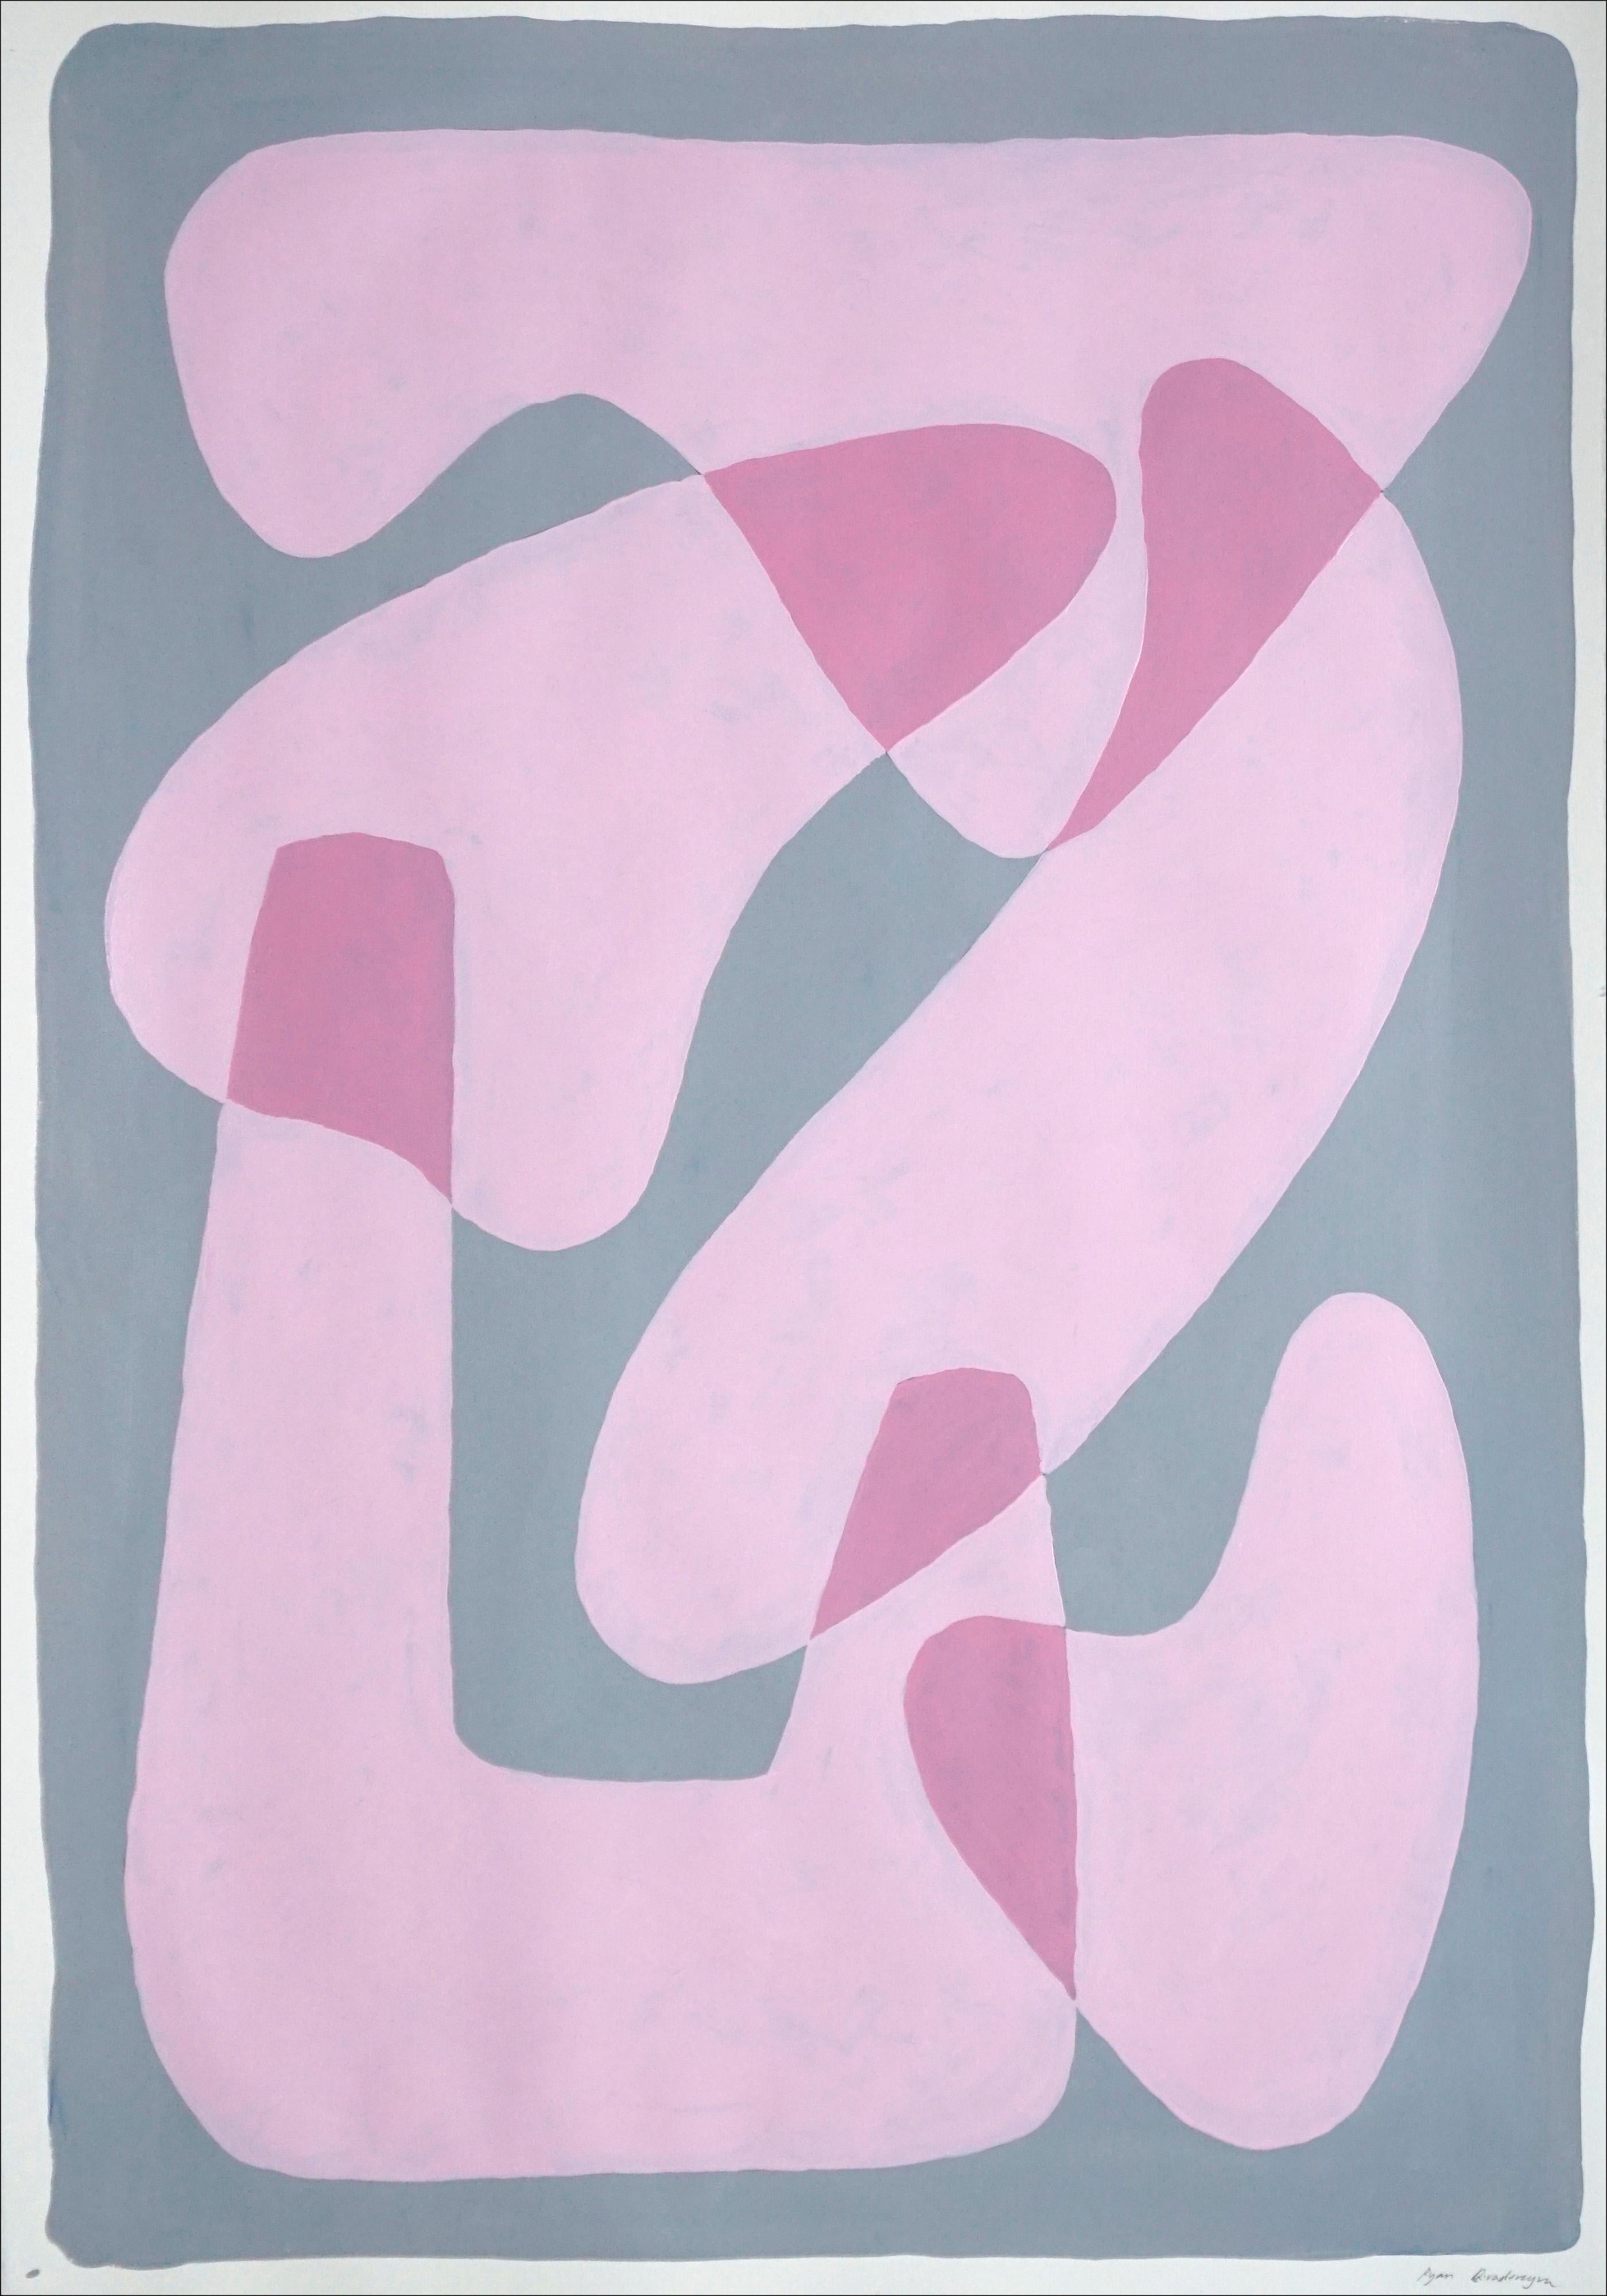 Ryan Rivadeneyra Figurative Painting - Pastel Pink Figures, Abstract Body Shapes on Gray, Avant-Garde Style on Paper